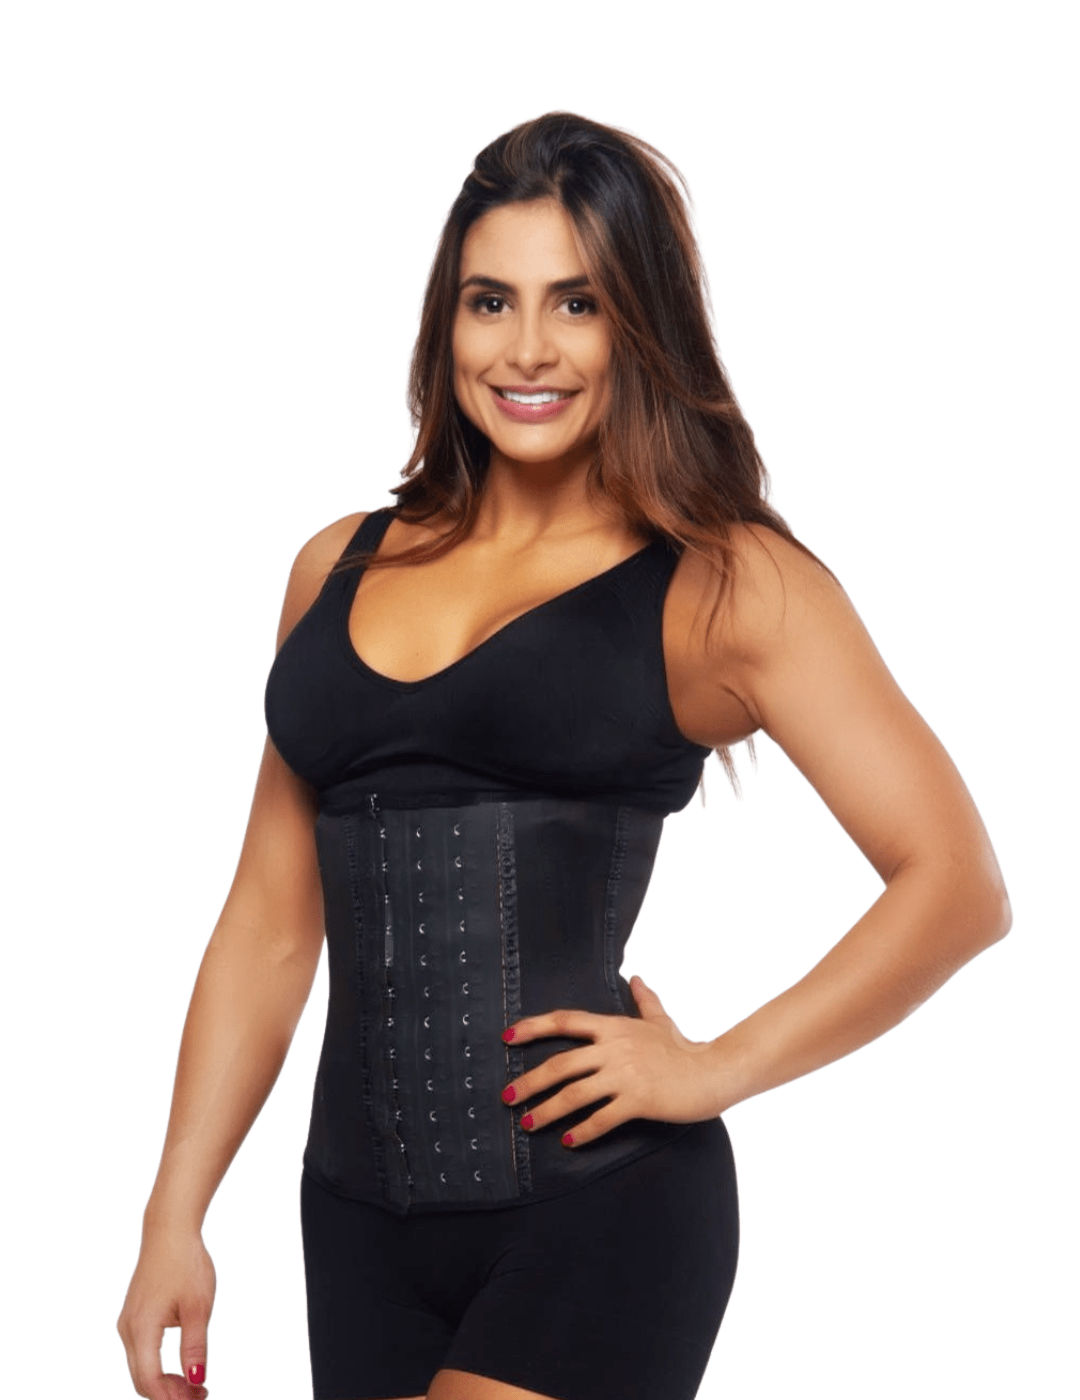 Plus Size Black Work Out Waist Trainer